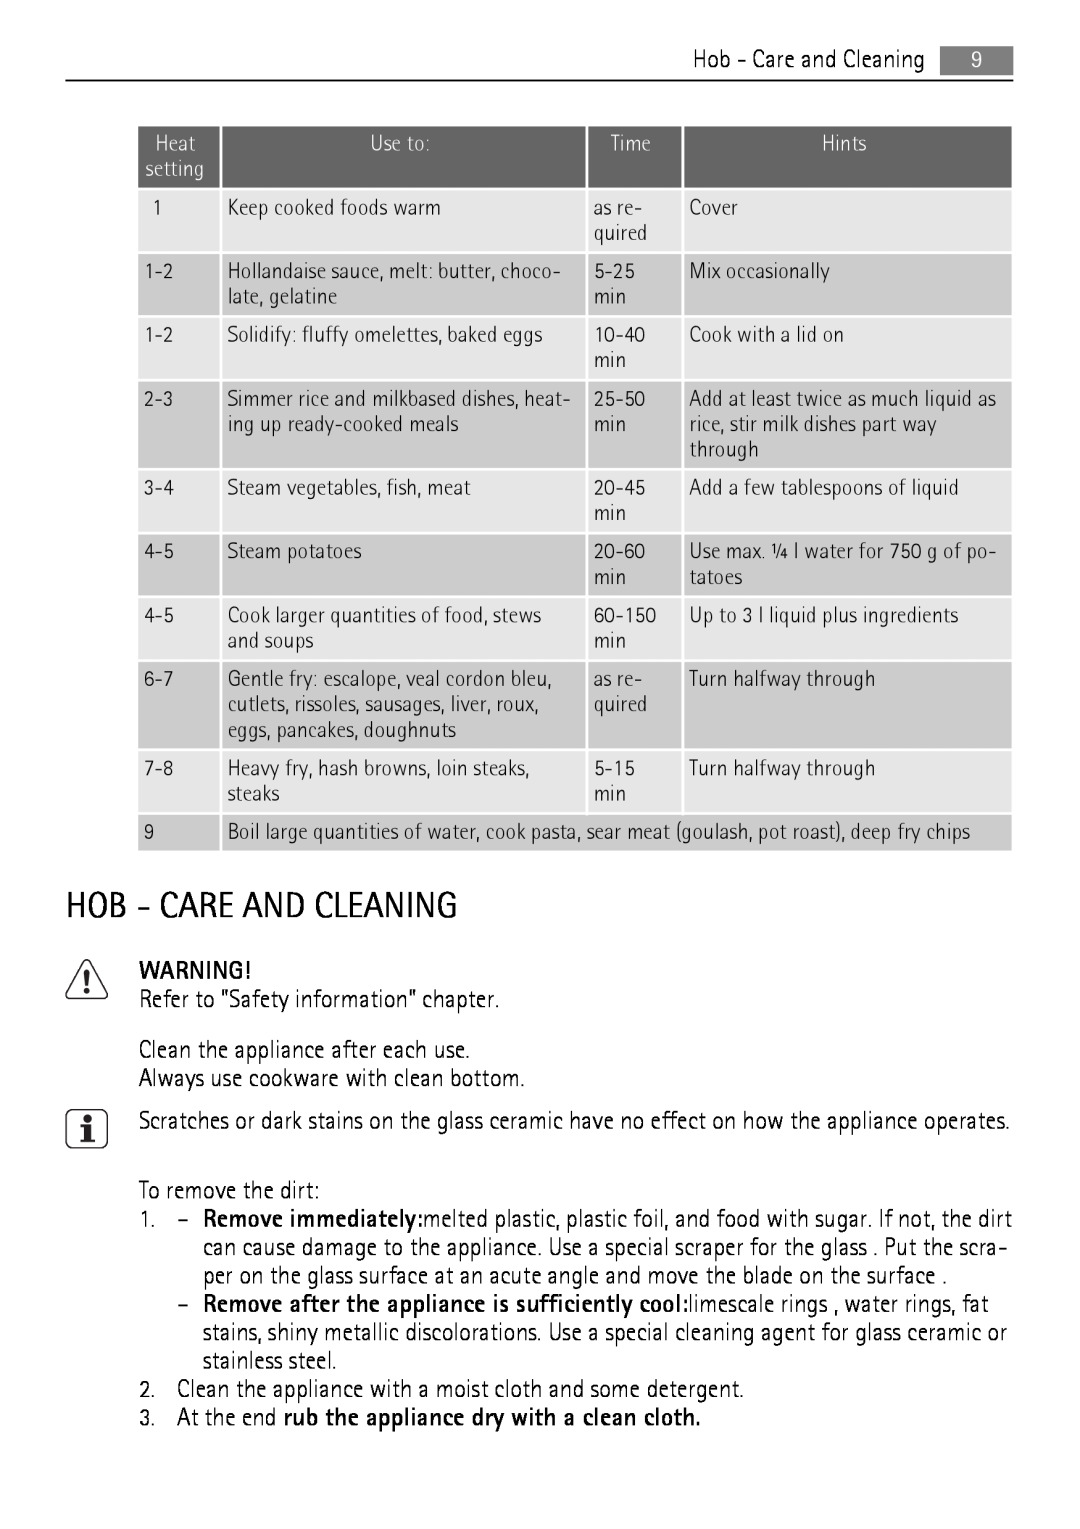 Electrolux 40036VI-WN user manual Hob - Care And Cleaning, At the end rub the appliance dry with a clean cloth 